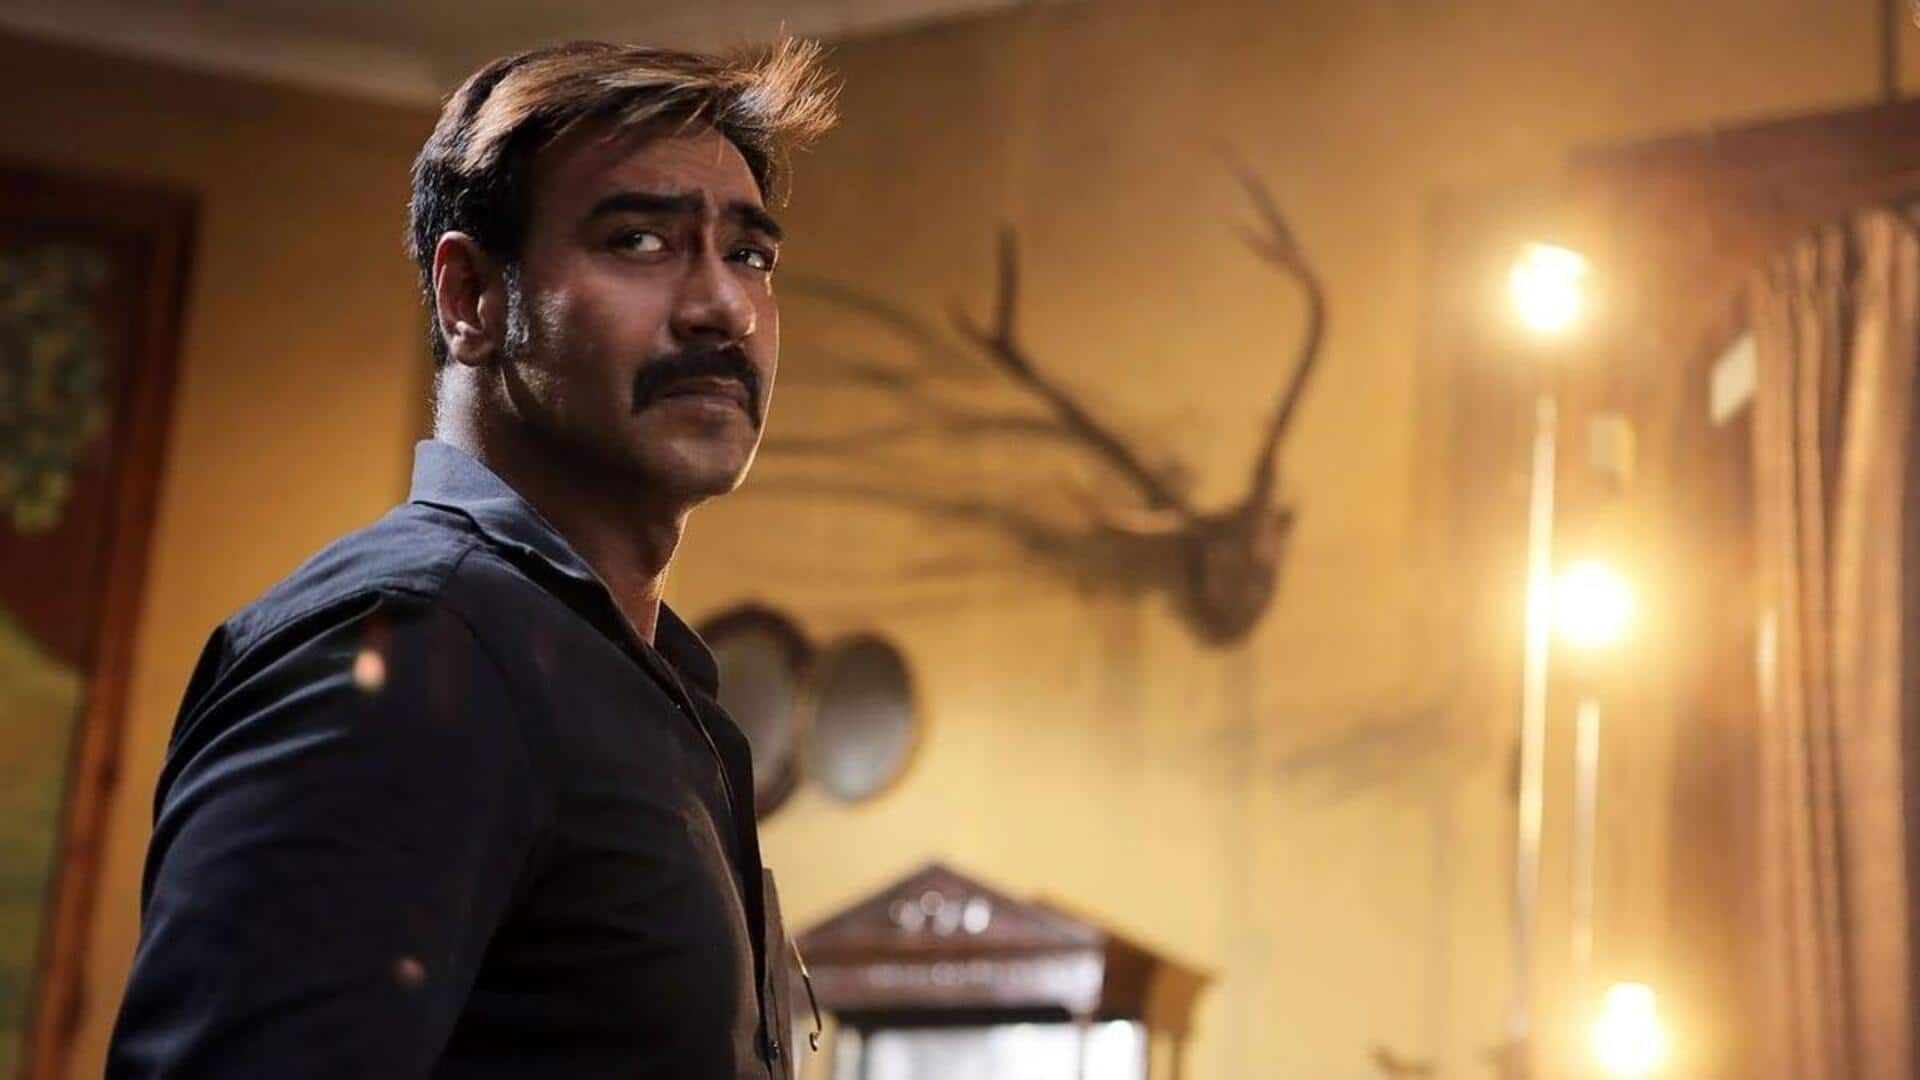 NewsBytes Exclusive: Ajay Devgn's 'Raid 2' ready for Lucknow schedule